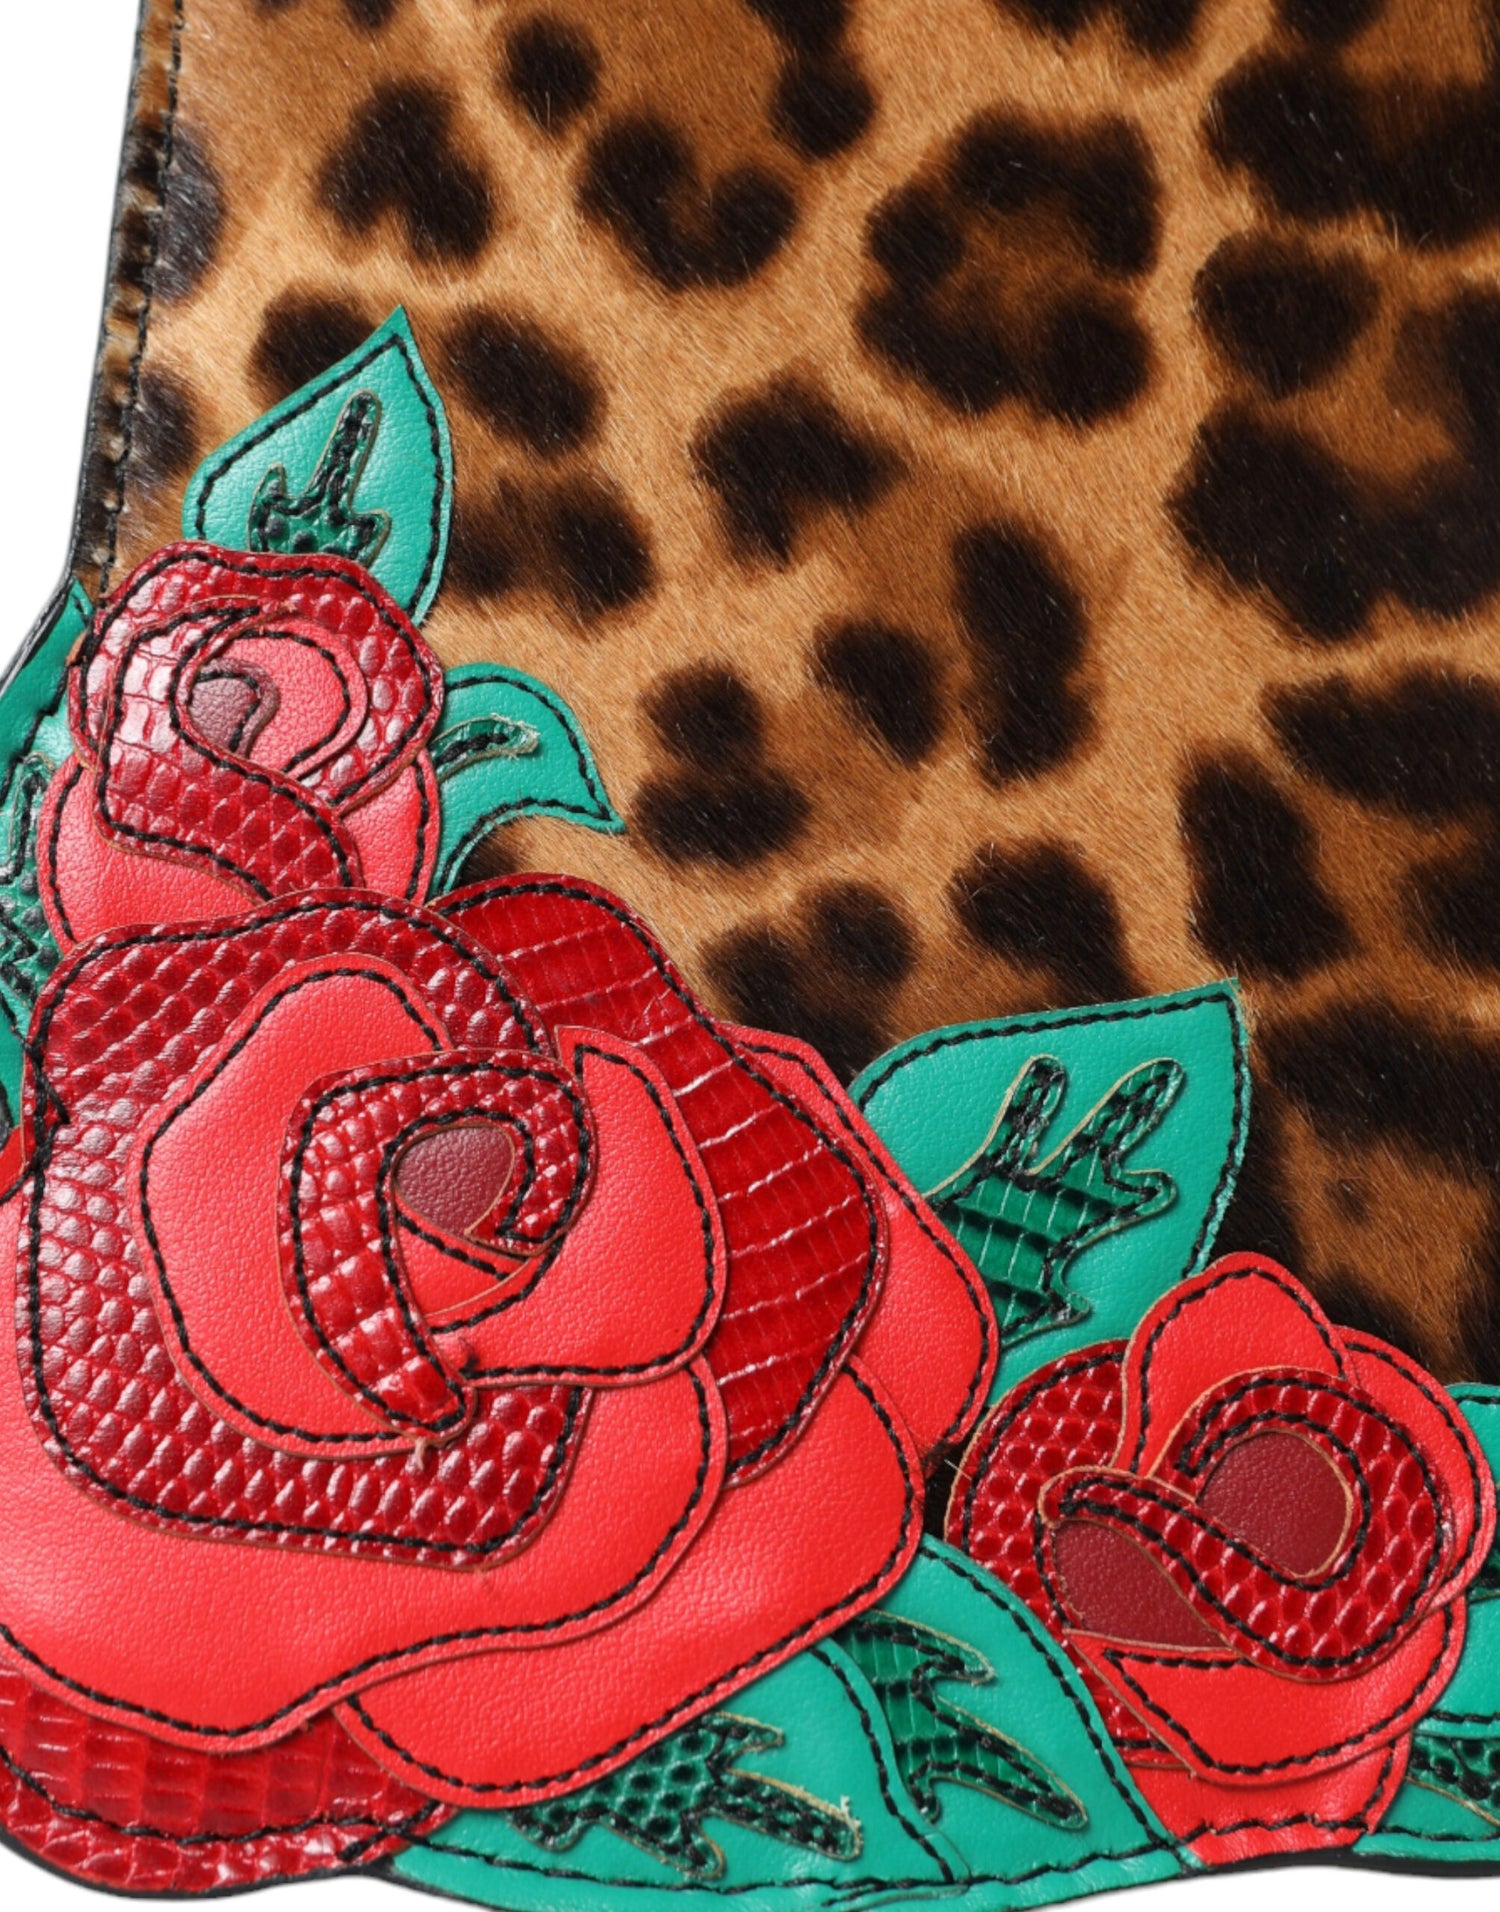 Dolce & Gabbana Chic Leopard Embellished Tote with Red Roses - DEA STILOSA MILANO